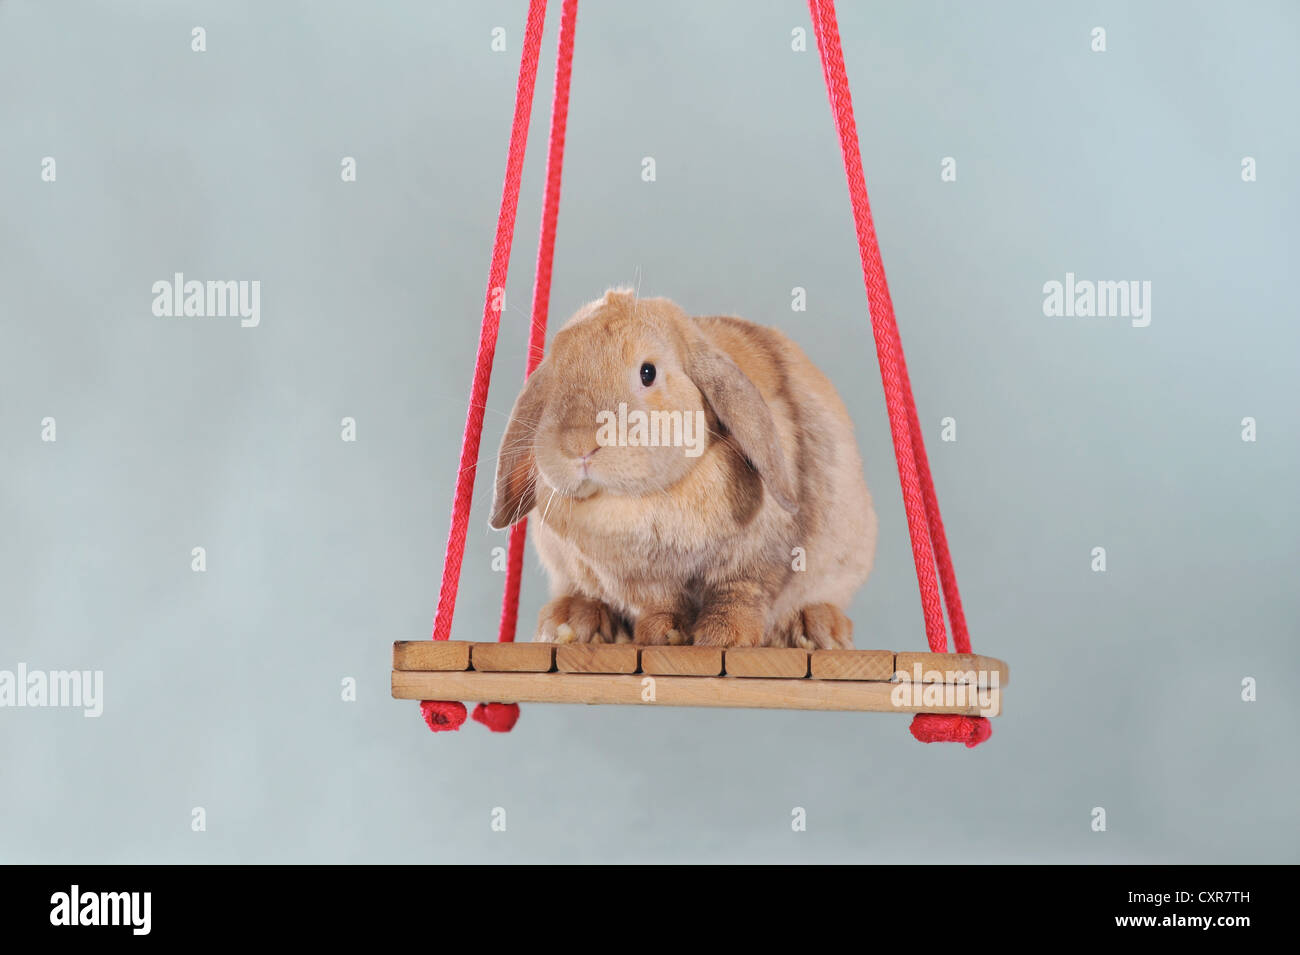 Spotted long eared rabbit sitting on a swing Stock Photo